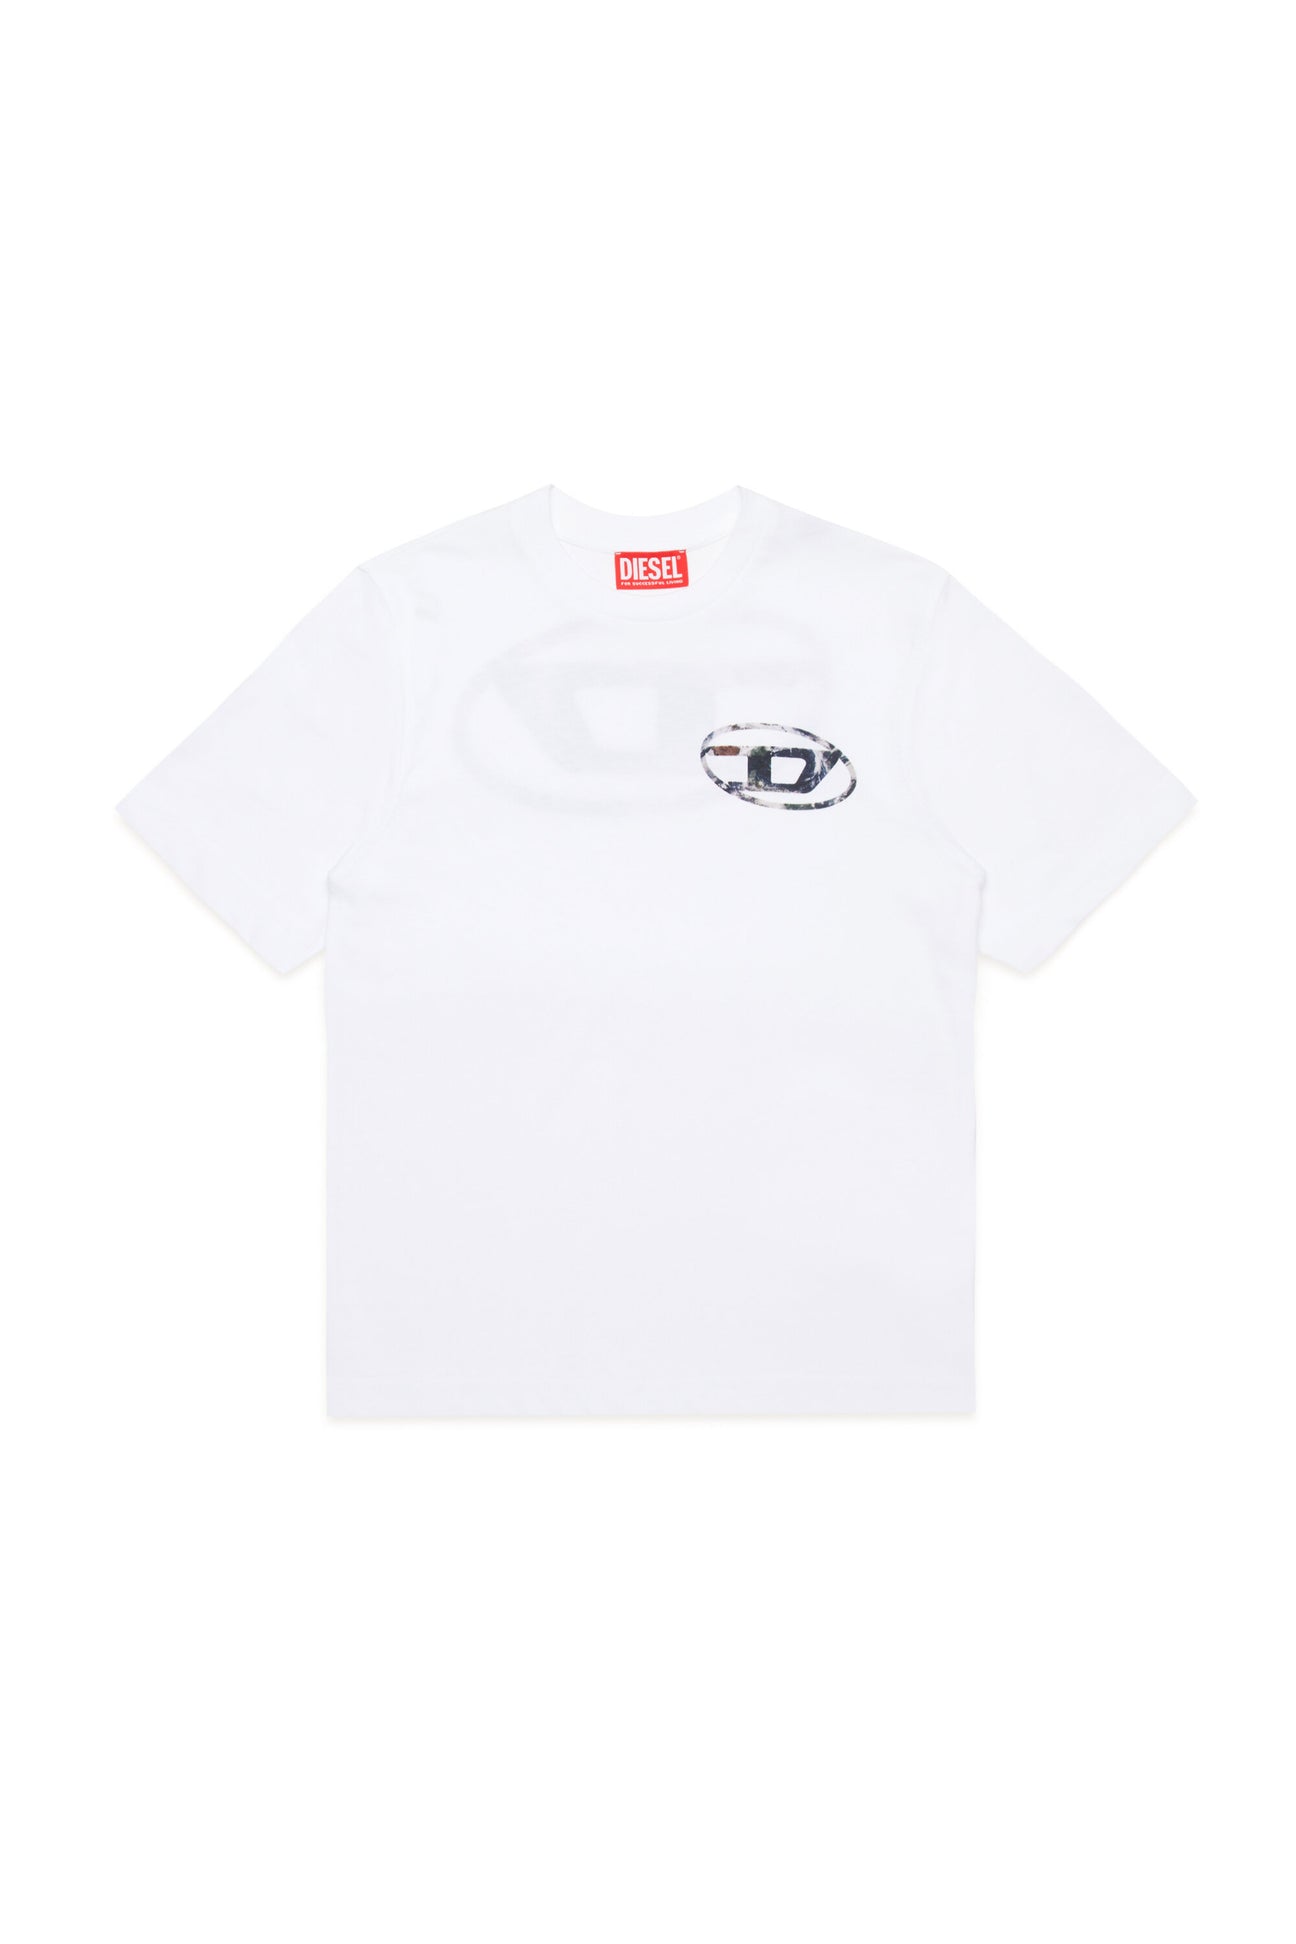 Oval D Planet Camou branded T-shirt 